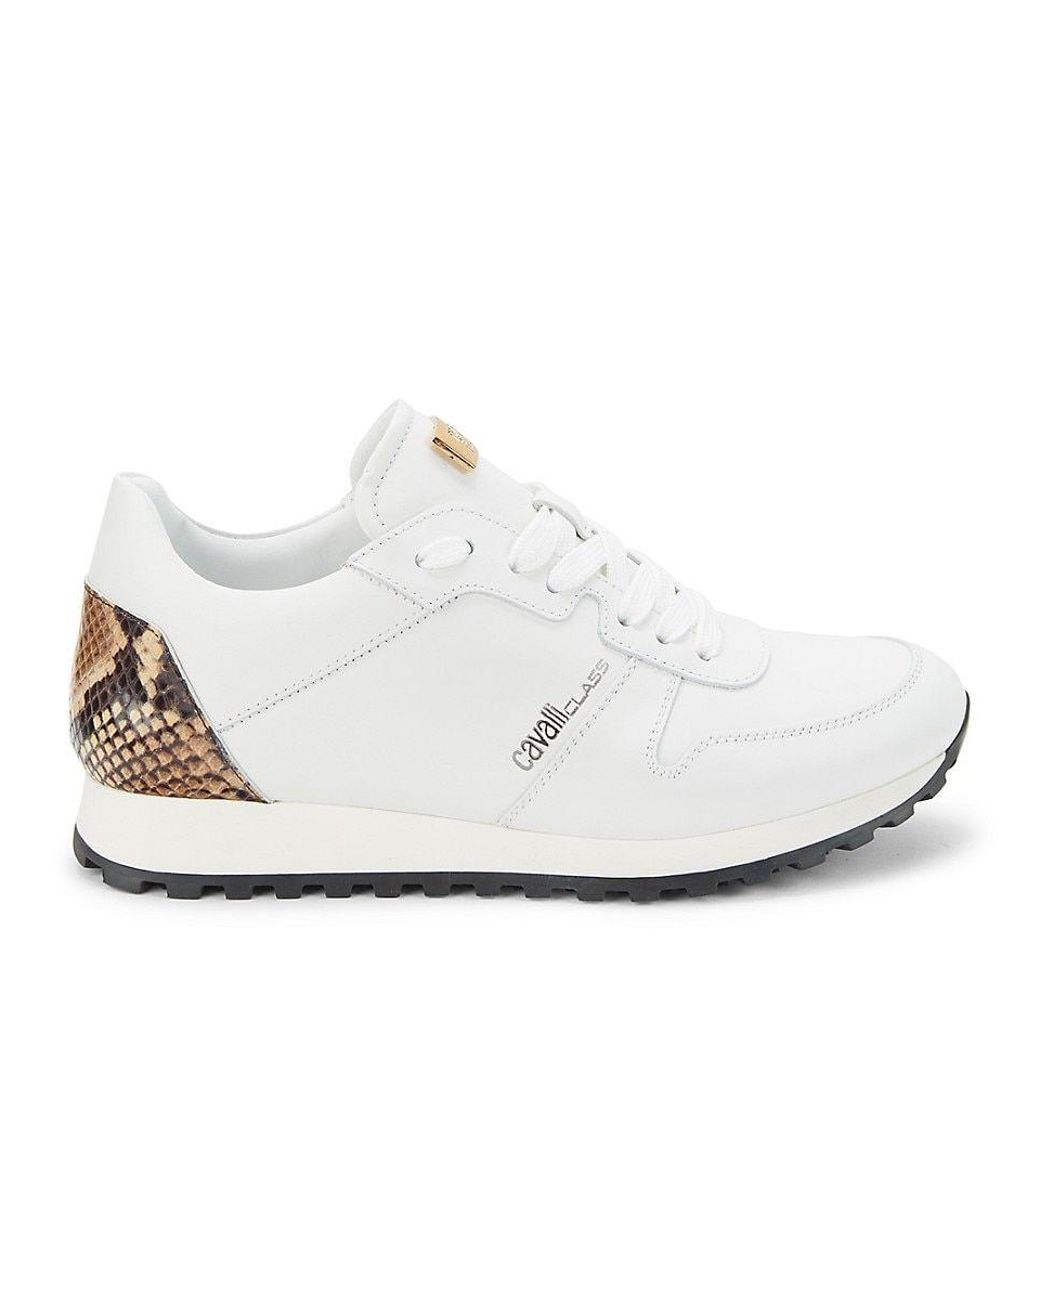 Class Roberto Cavalli Snake Embossed Trim Leather Running Sneakers in White  for Men | Lyst